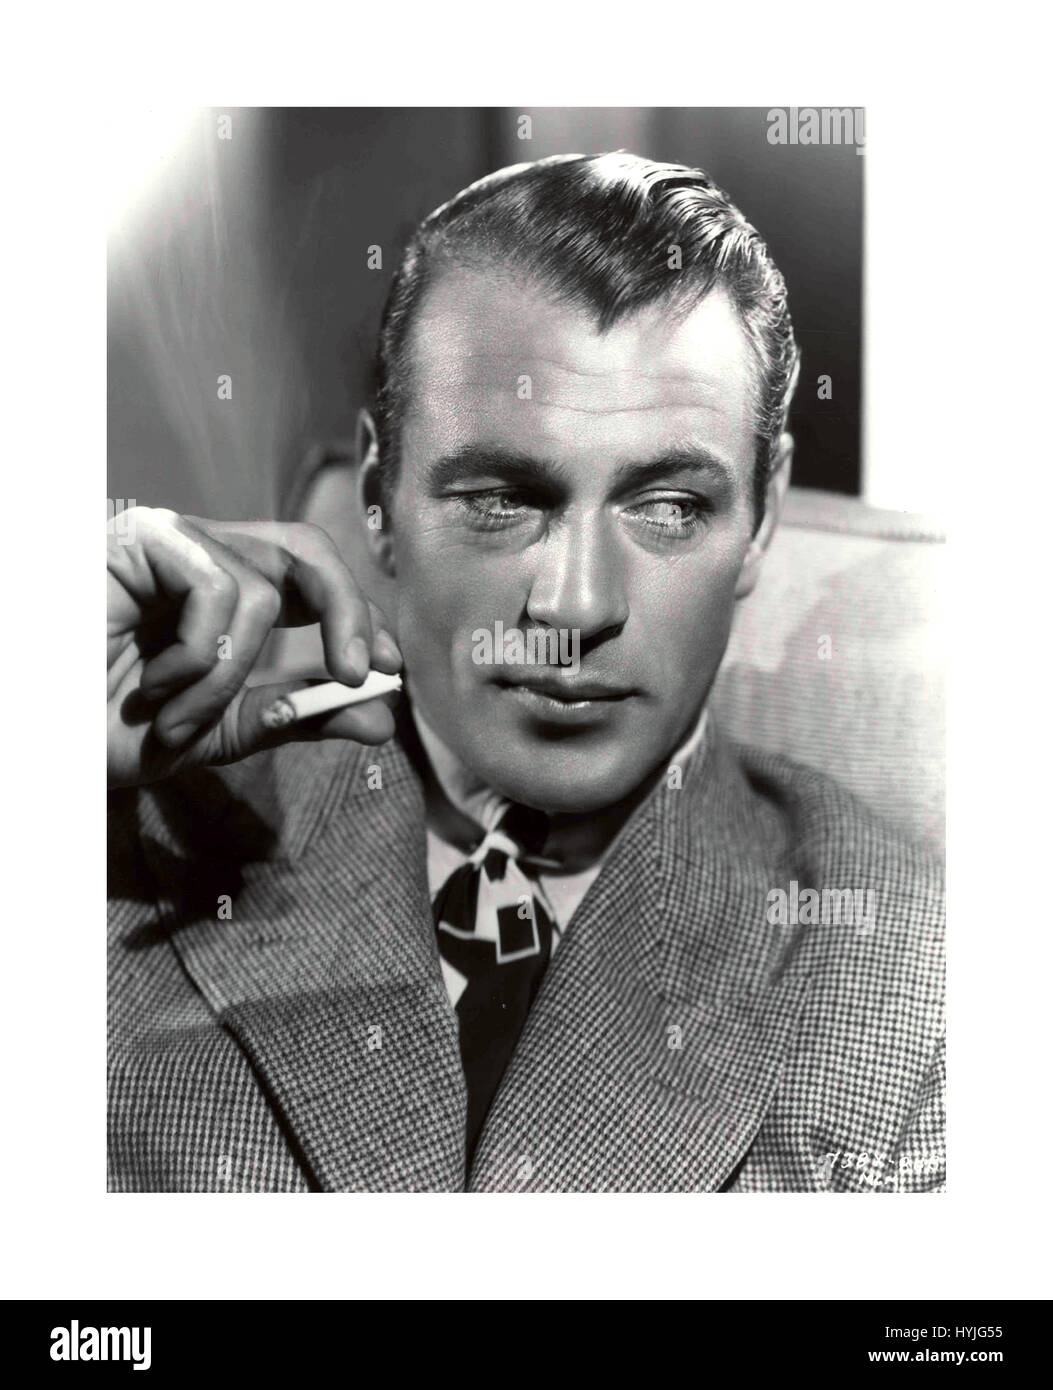 GARY COOPER ACTOR Hollywood film still of Gary Cooper (born Frank James Cooper; May 7, 1901 - May 13, 1961)  an American film actor known for his natural, authentic, and understated acting style and screen performances. He was  a very popular handsome young man Stock Photo